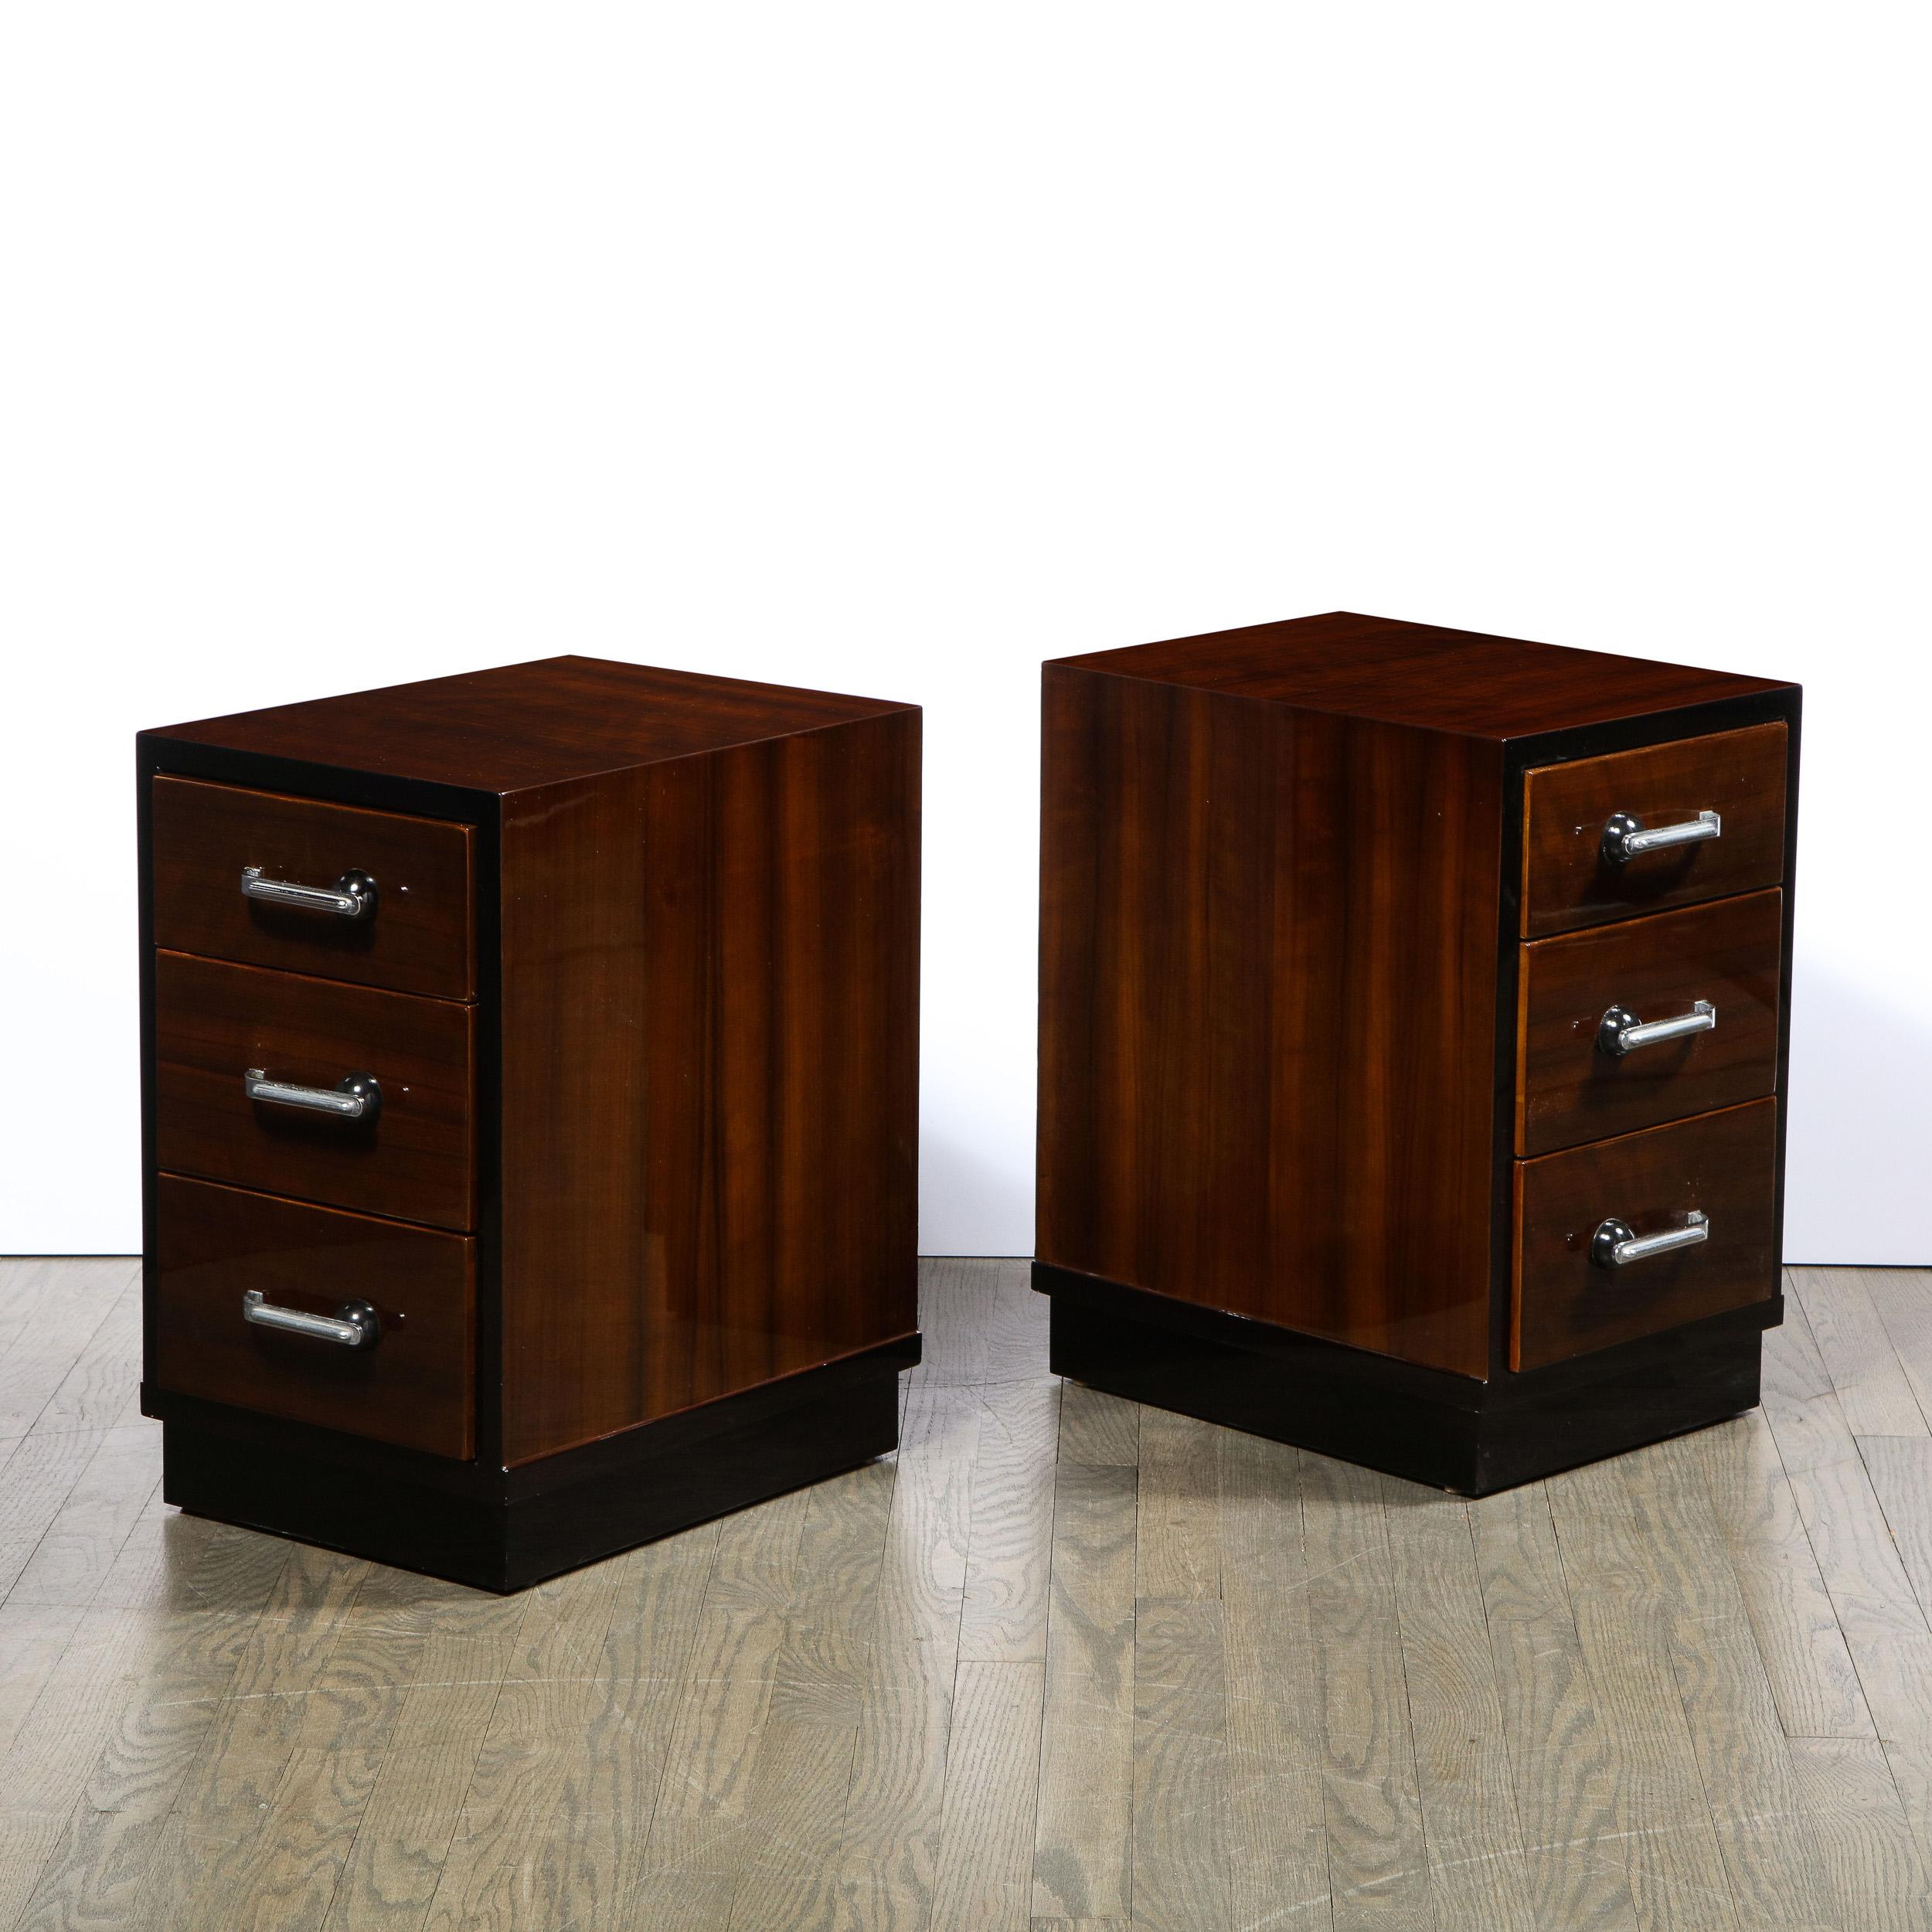 American Pair of Art Deco Nightstands in Lacquer & Walnut w/ Streamlined Chrome Pulls